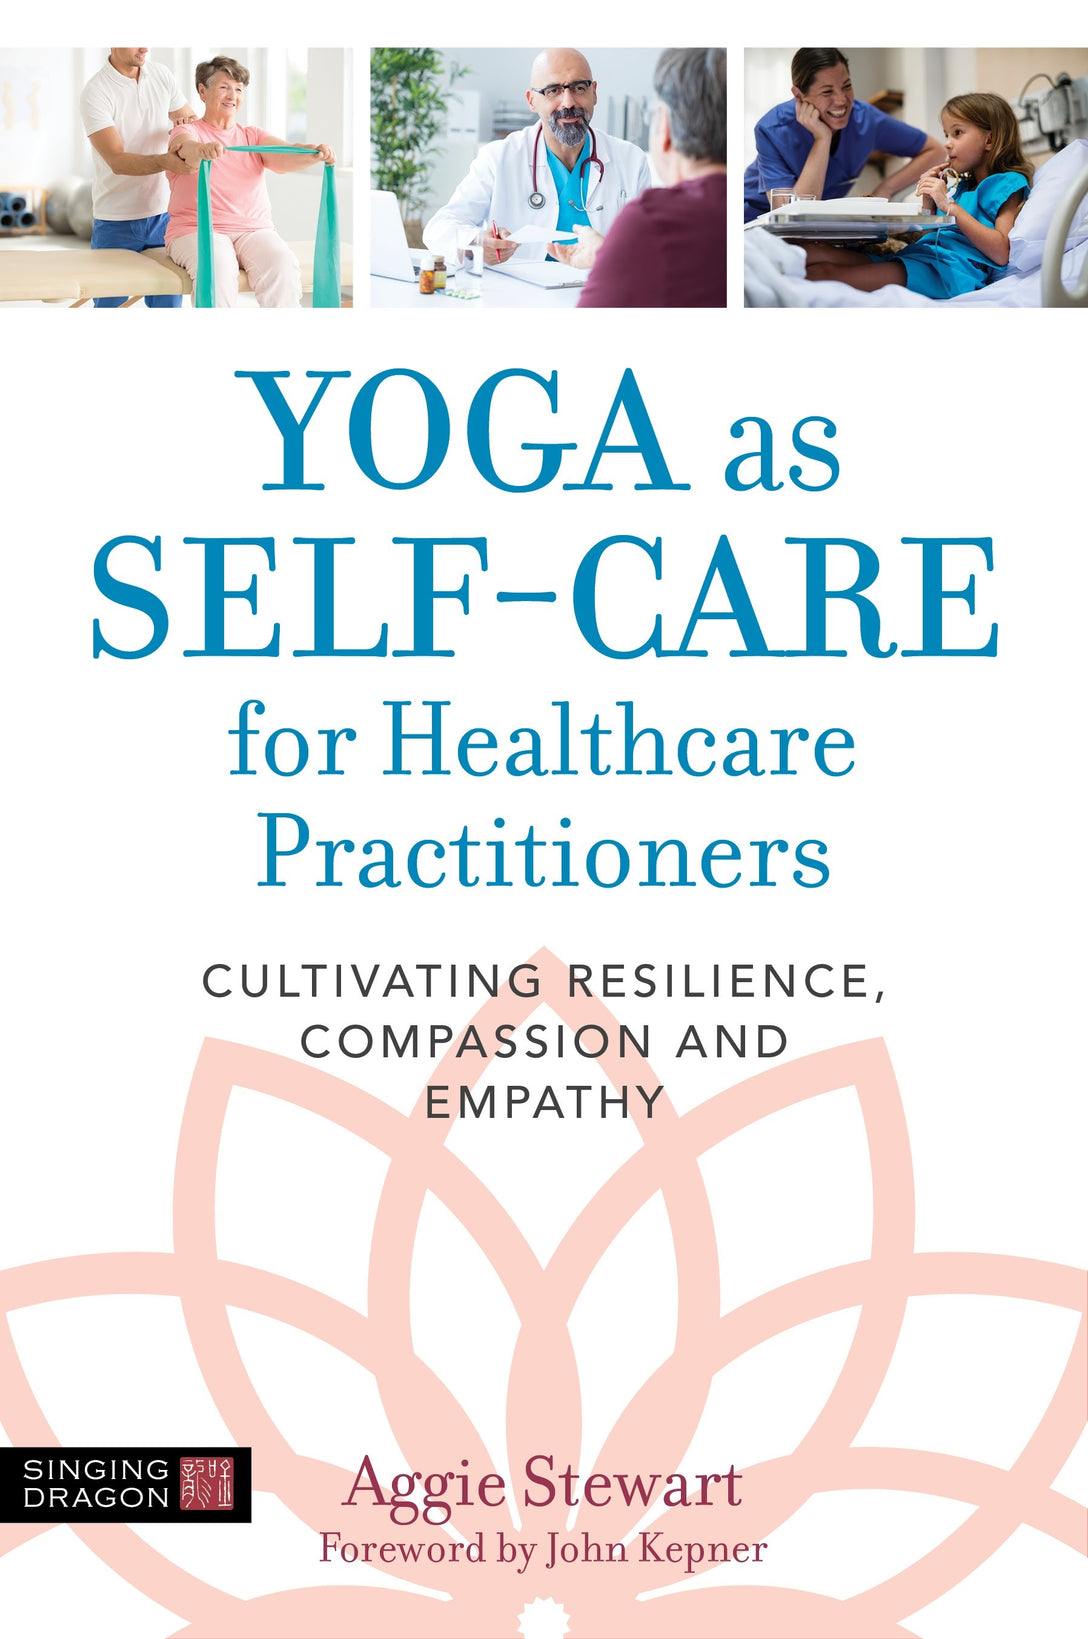 Yoga as Self-Care for Healthcare Practitioners by Aggie Stewart